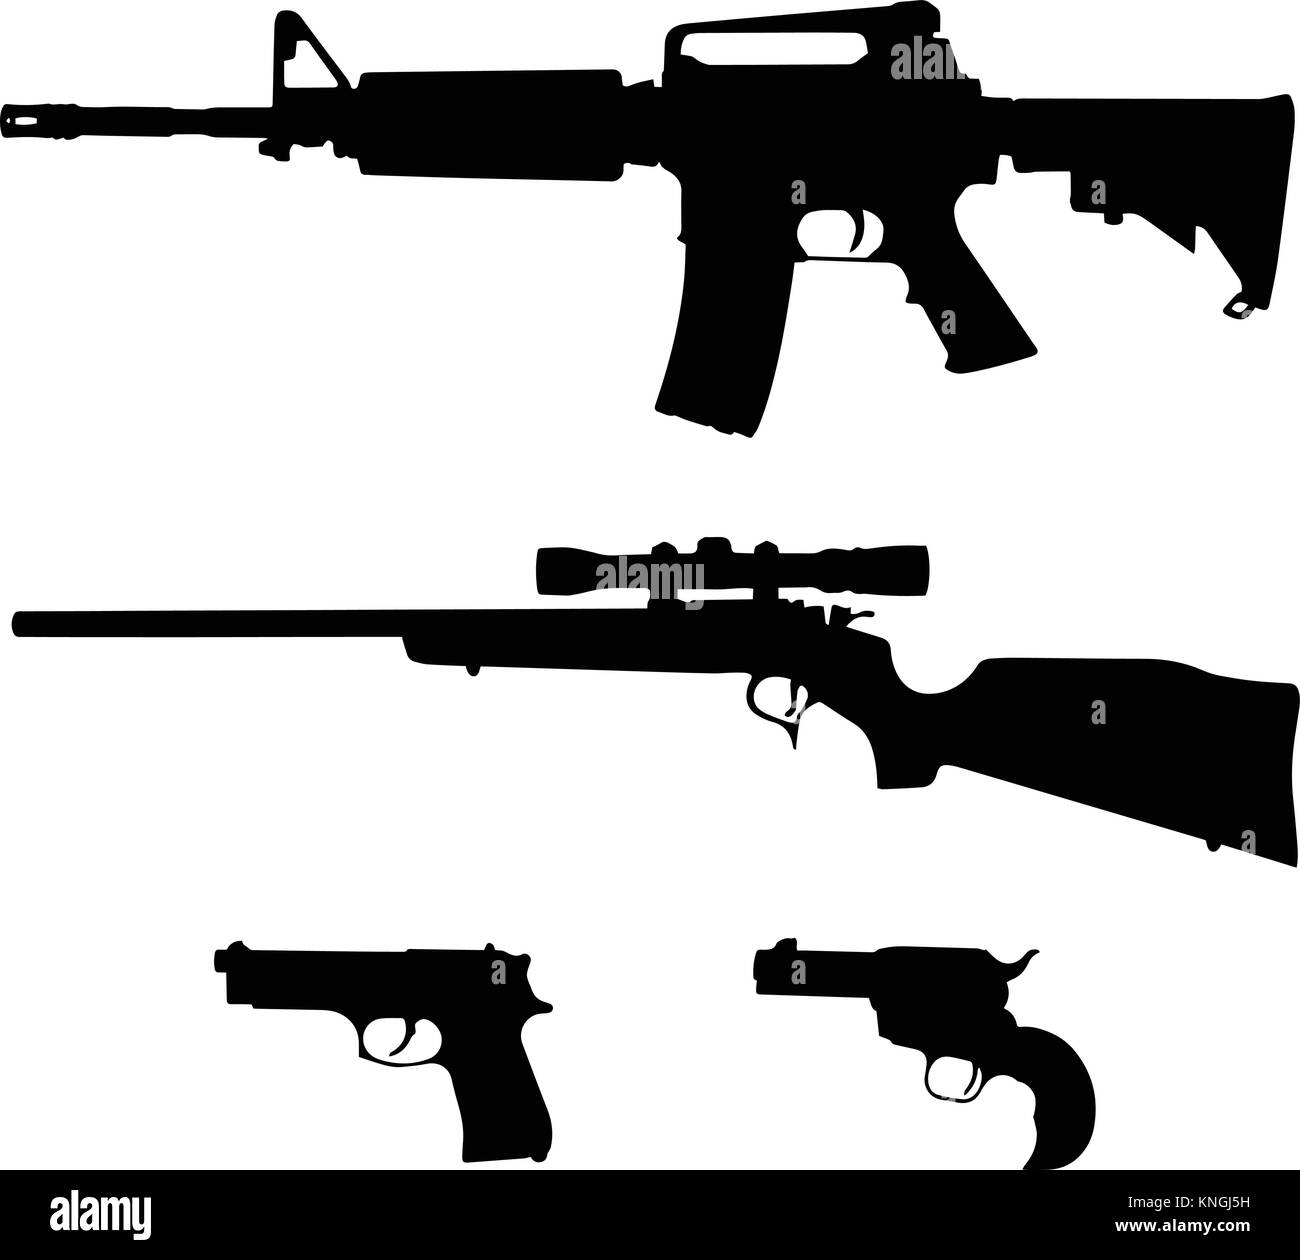 AR-15 style Semi-Automatic Rifle, Bolt Action Rifle and Pistols Silhouette Vector Stock Vector